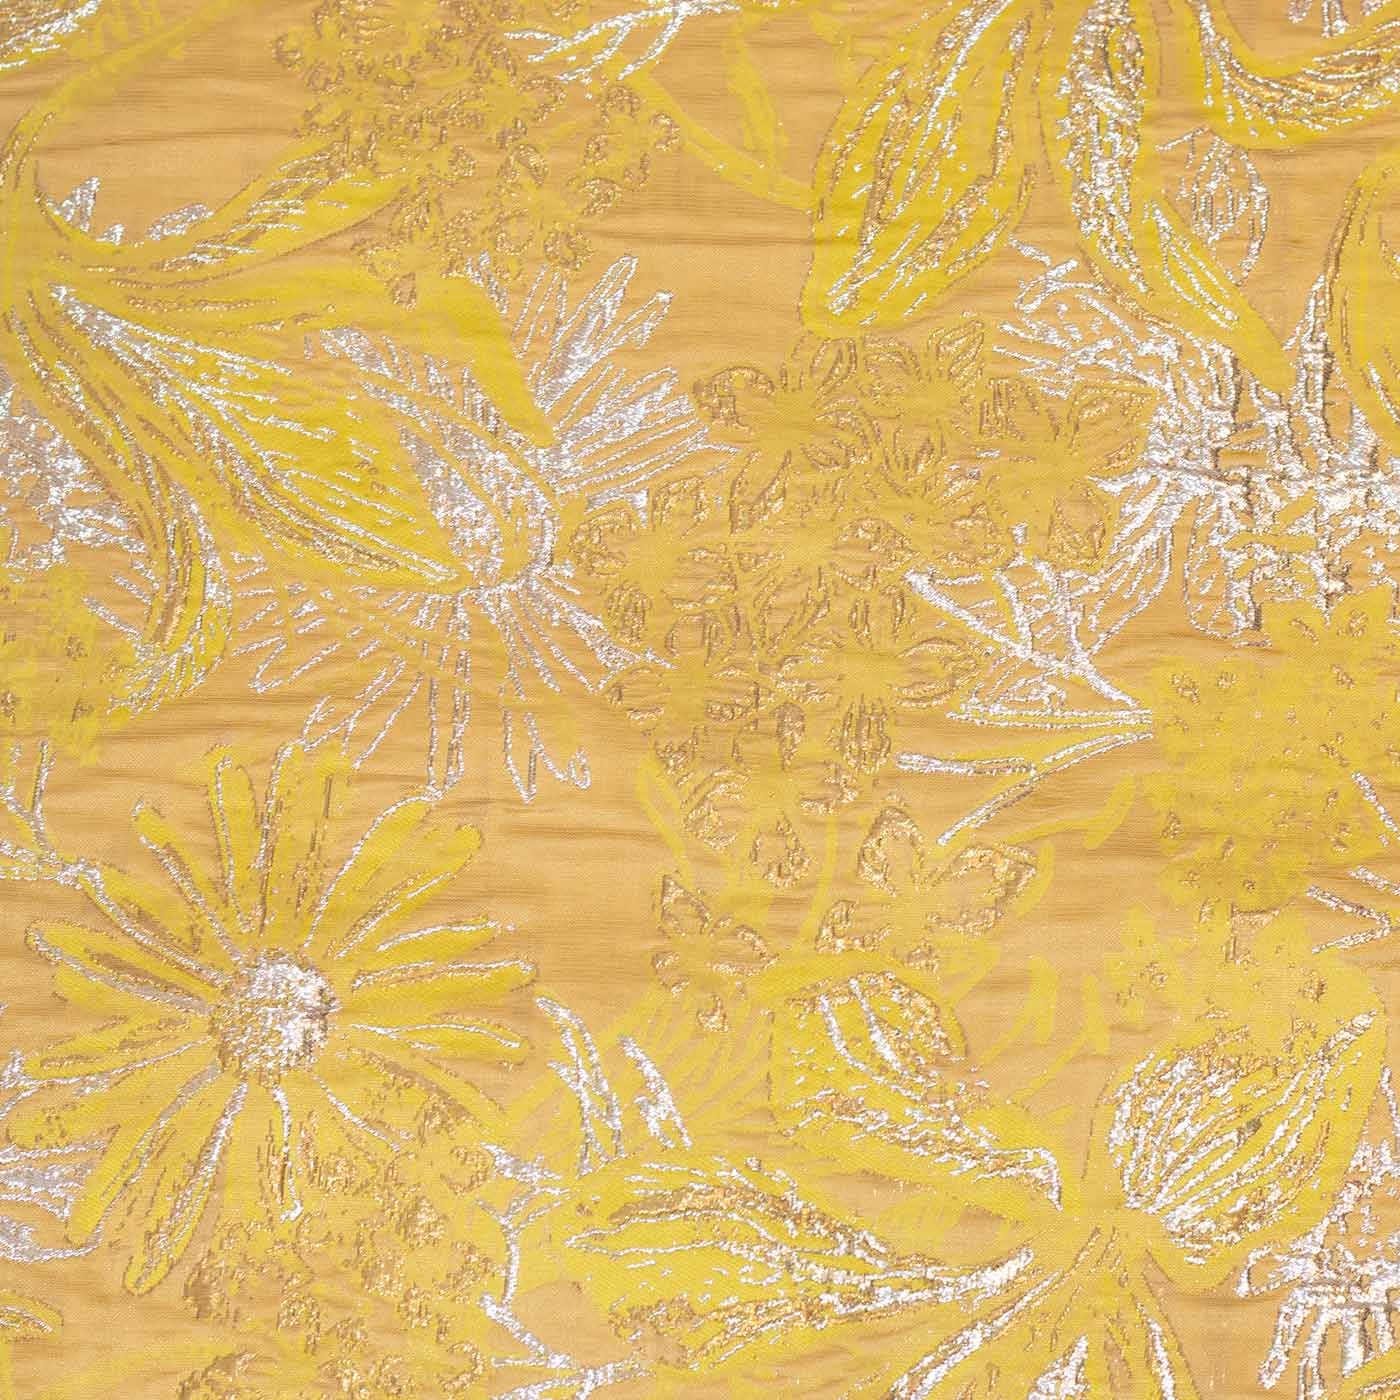 Yellow and Silver Floral Brocade Fbaric